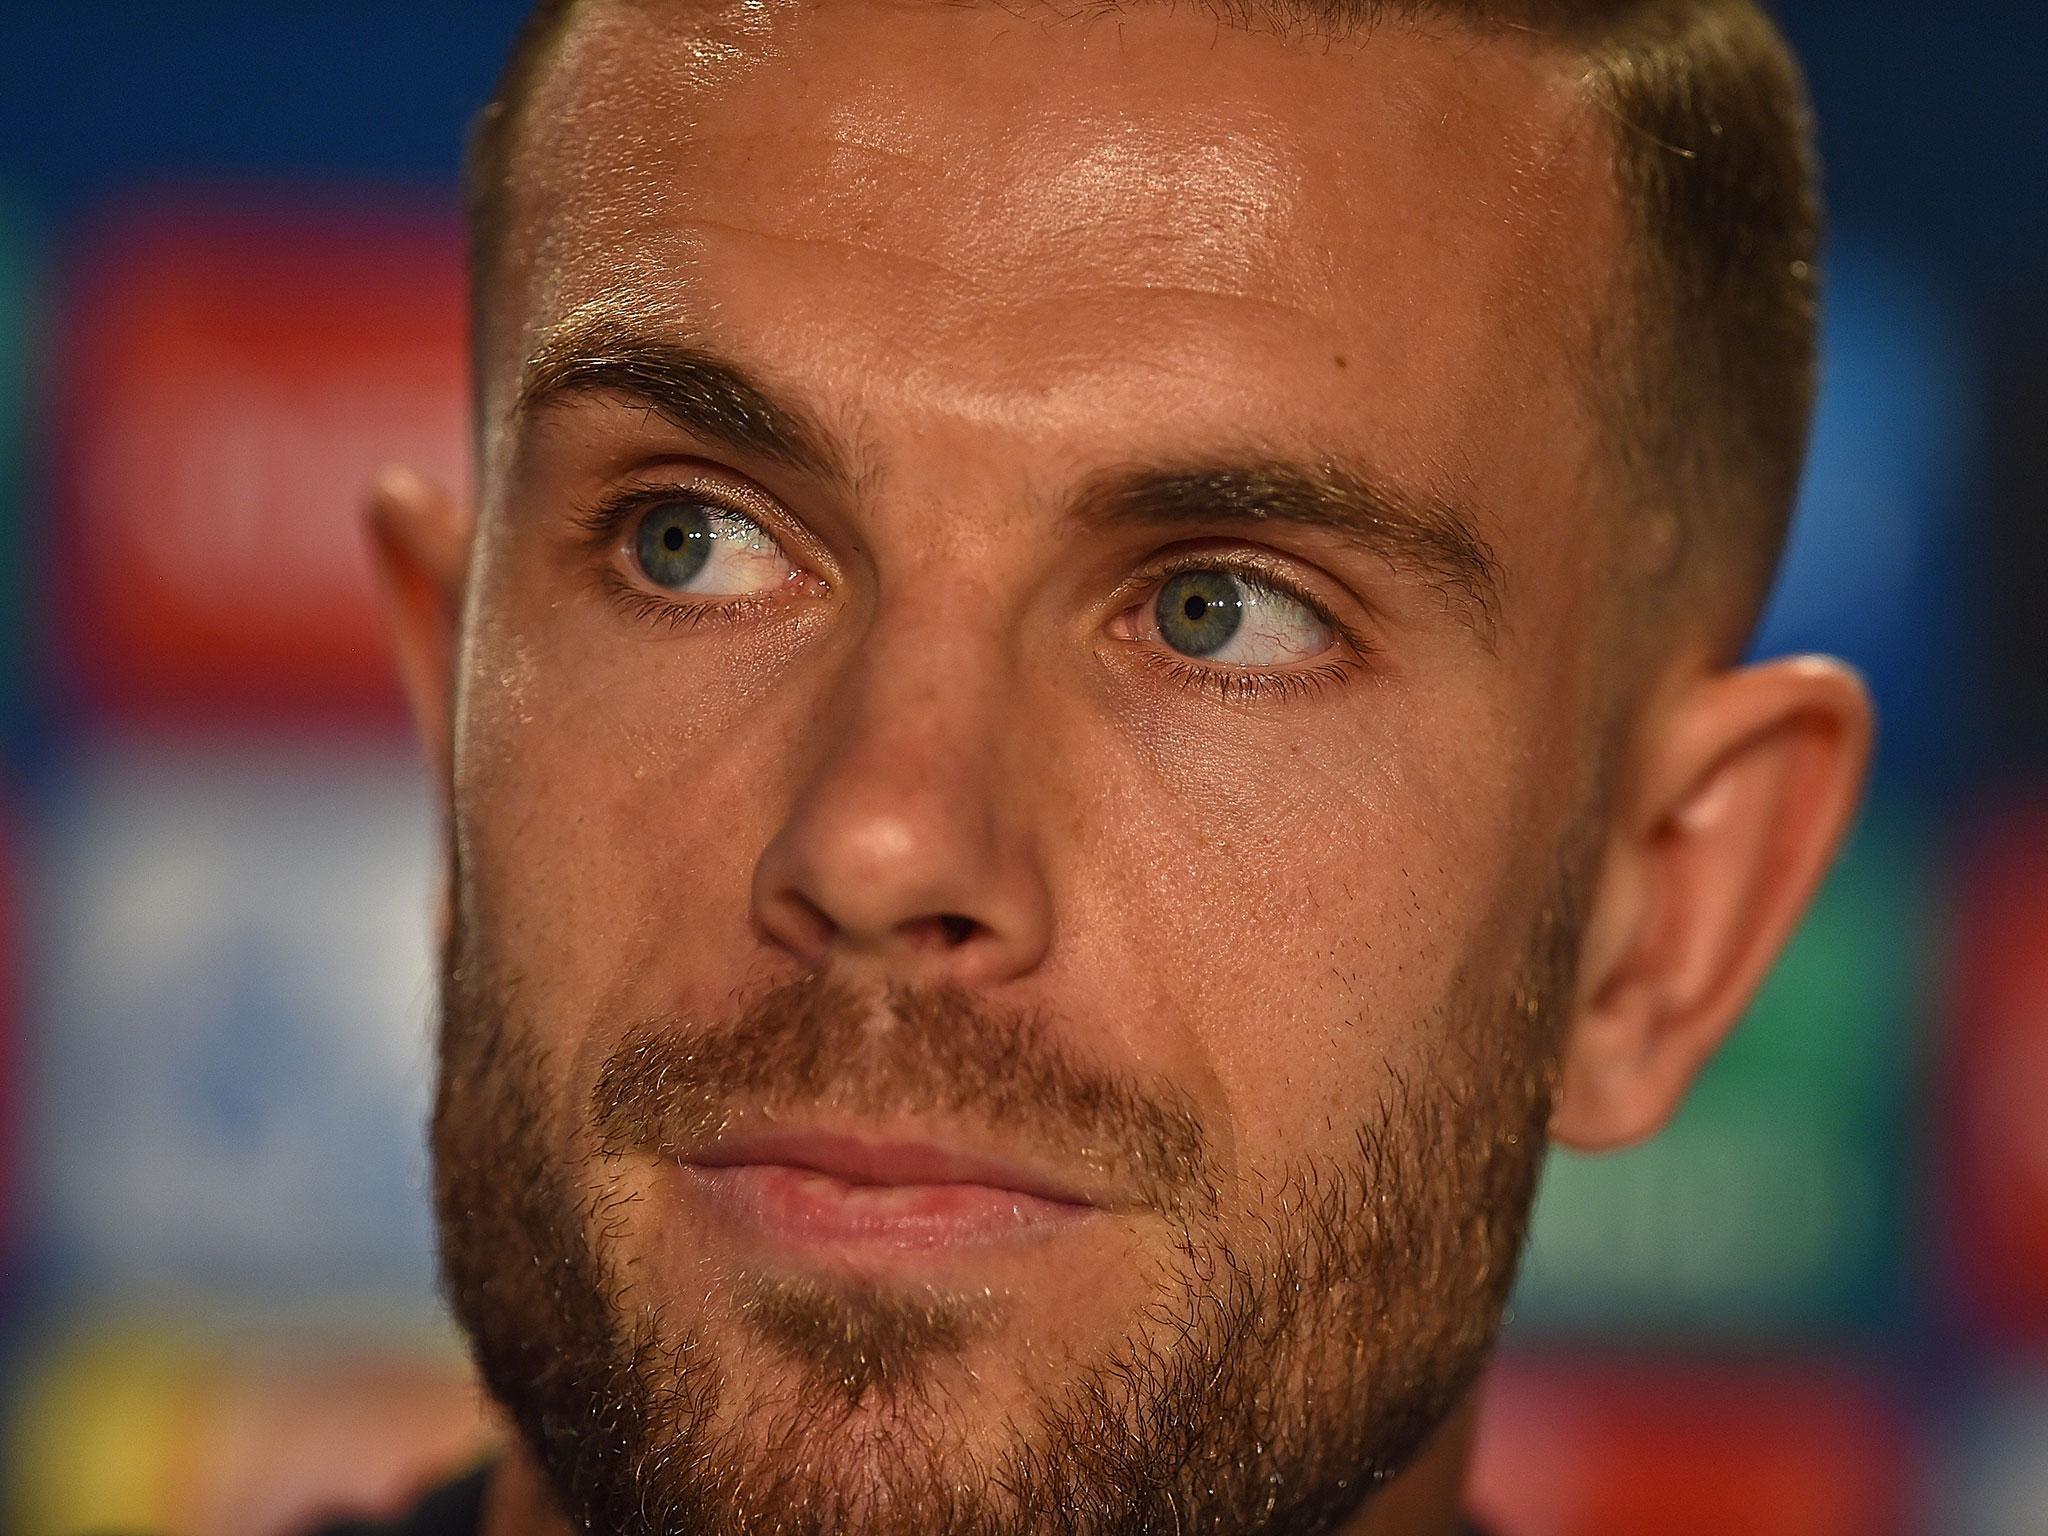 Jordan Henderson knows Liverpool face a pivotal matchup with Hoffenheim